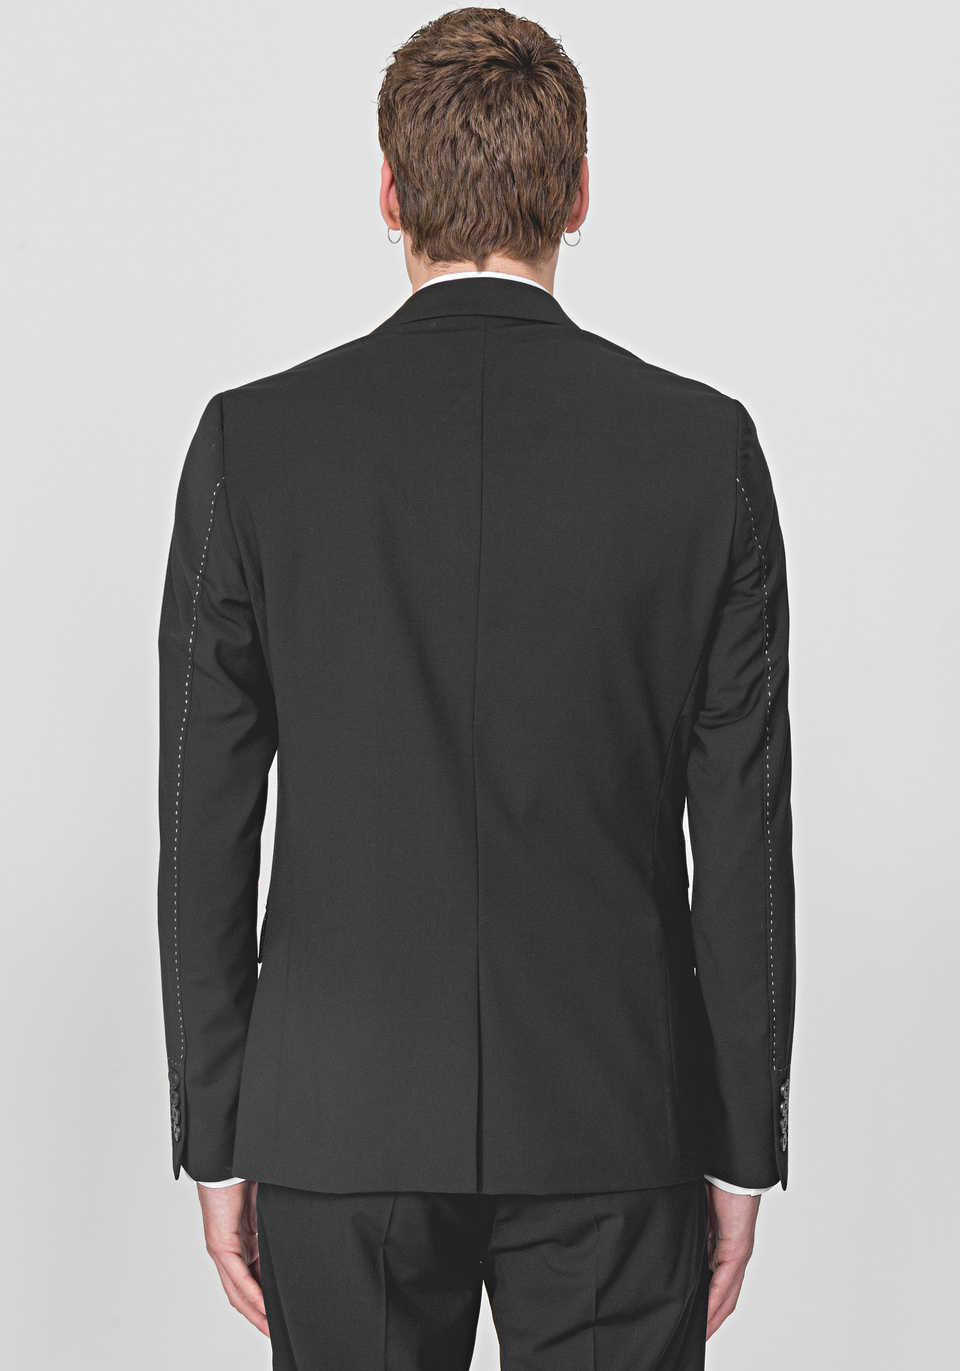 “BRANDY” SLIM-FIT LINED JACKET WITH SARTORIAL STITCHING - Antony Morato Online Shop